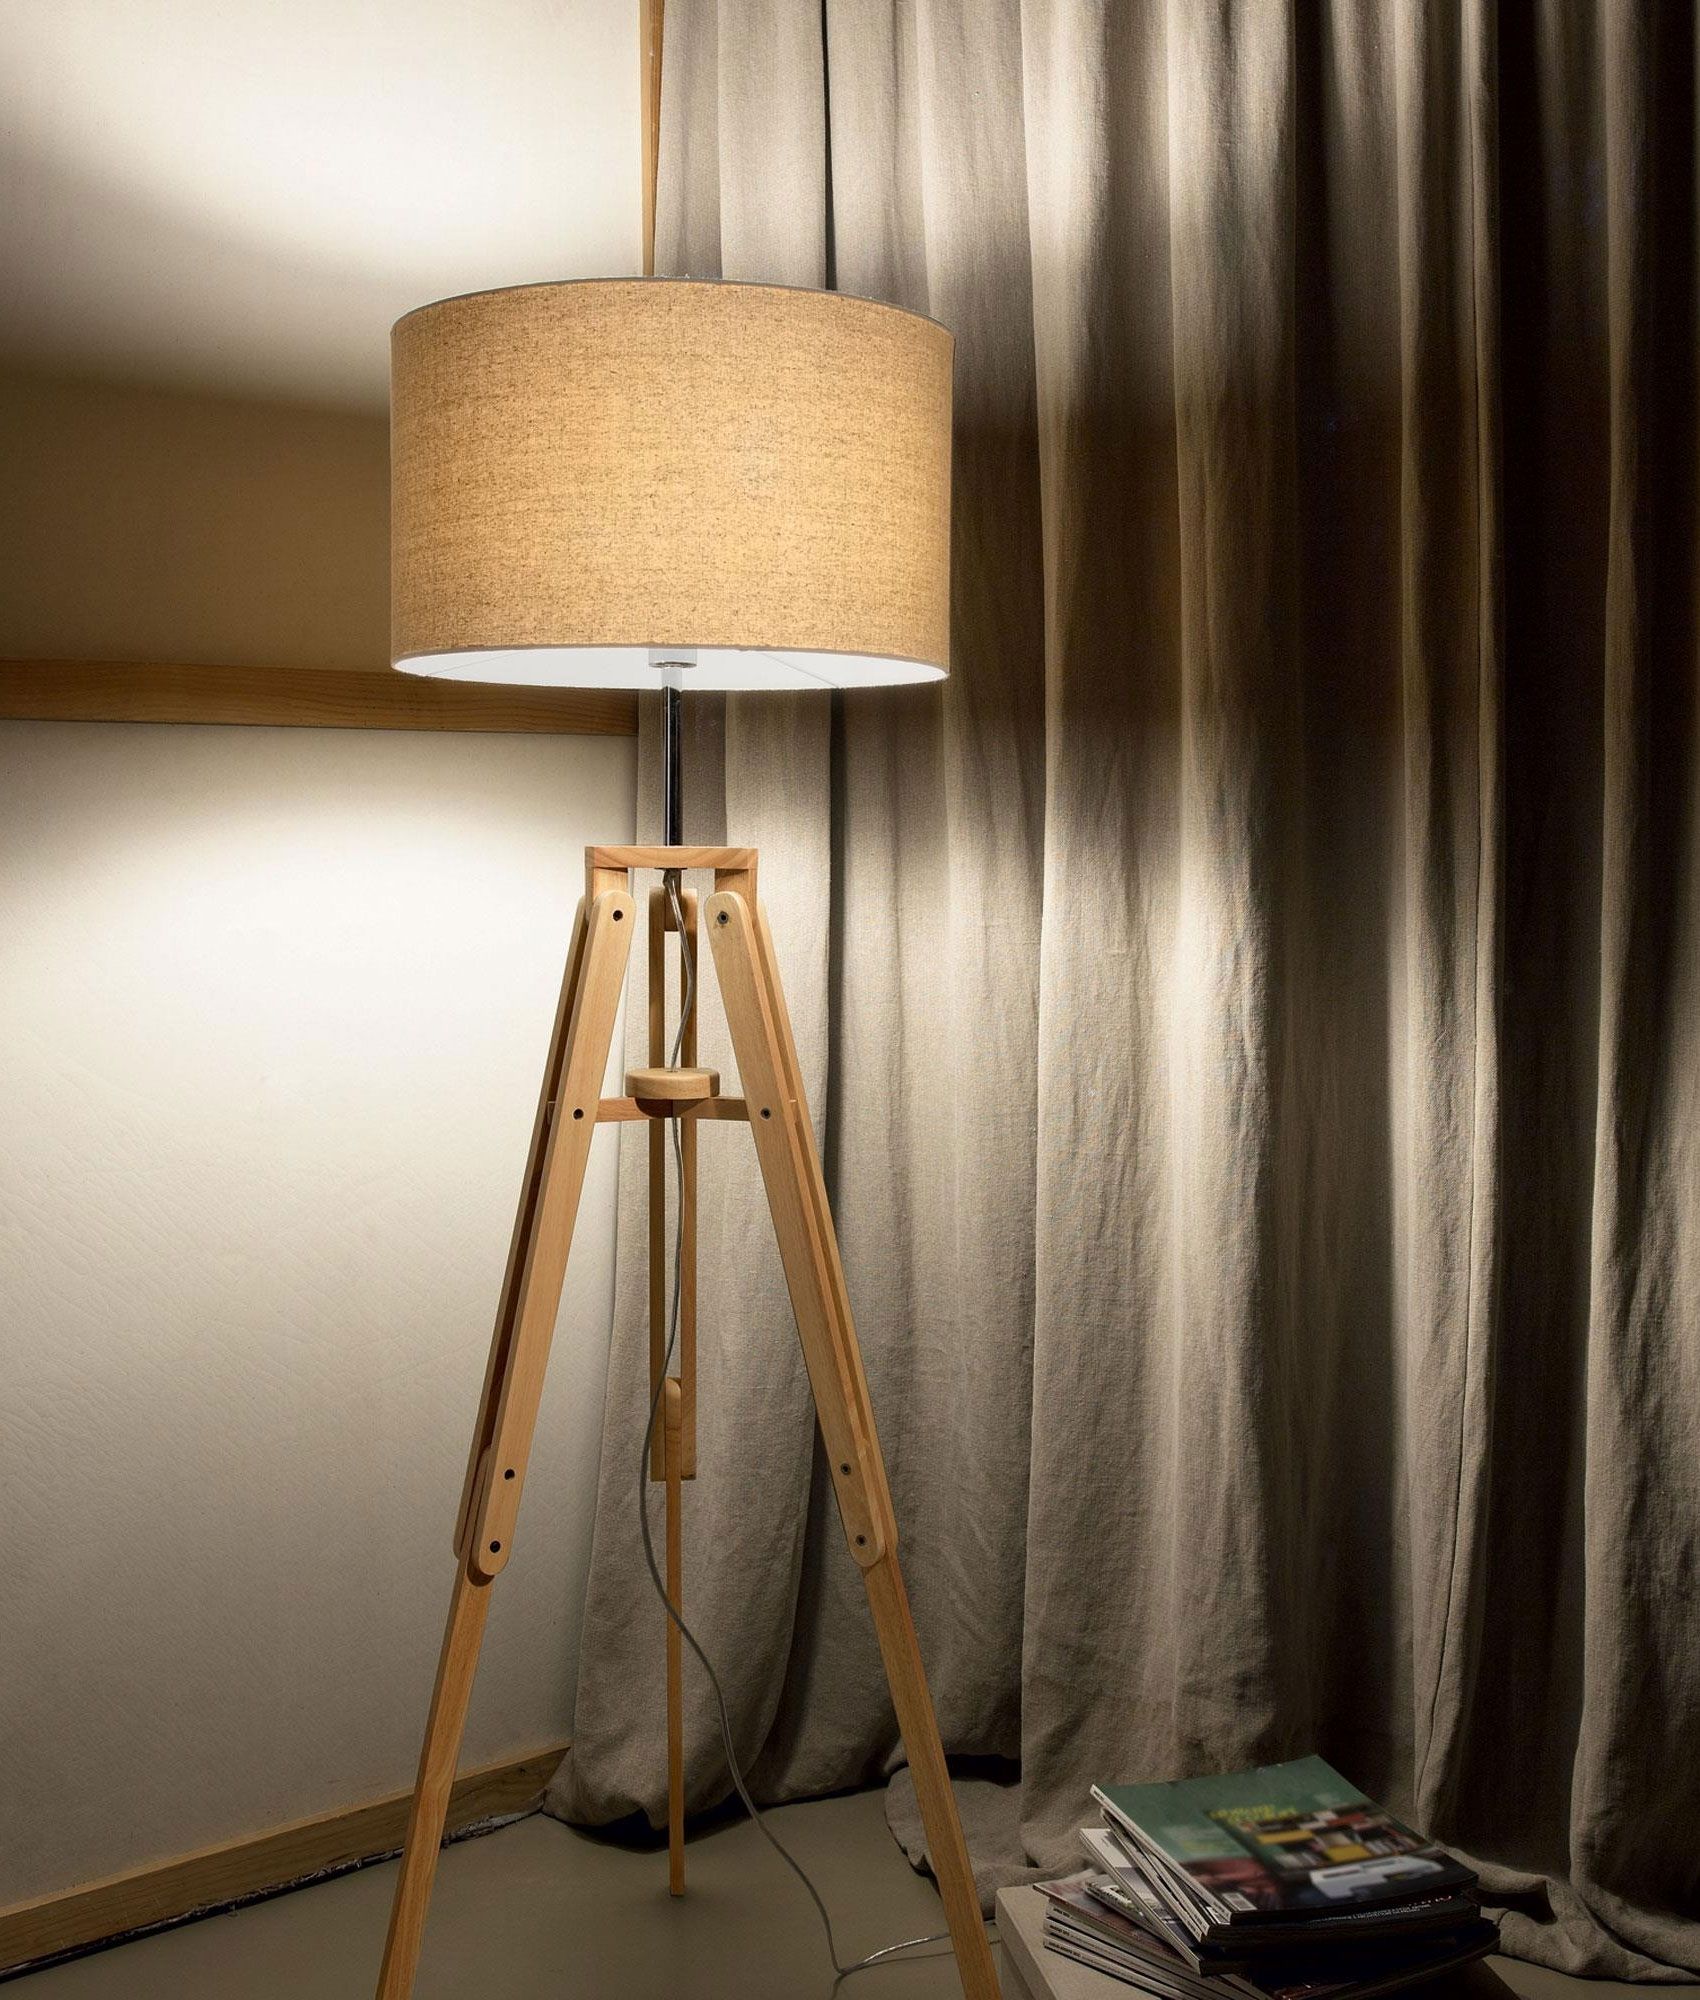 Shaded Natural Wood Tripod Floor Lamp Throughout Wood Tripod Floor Lamps (View 15 of 15)